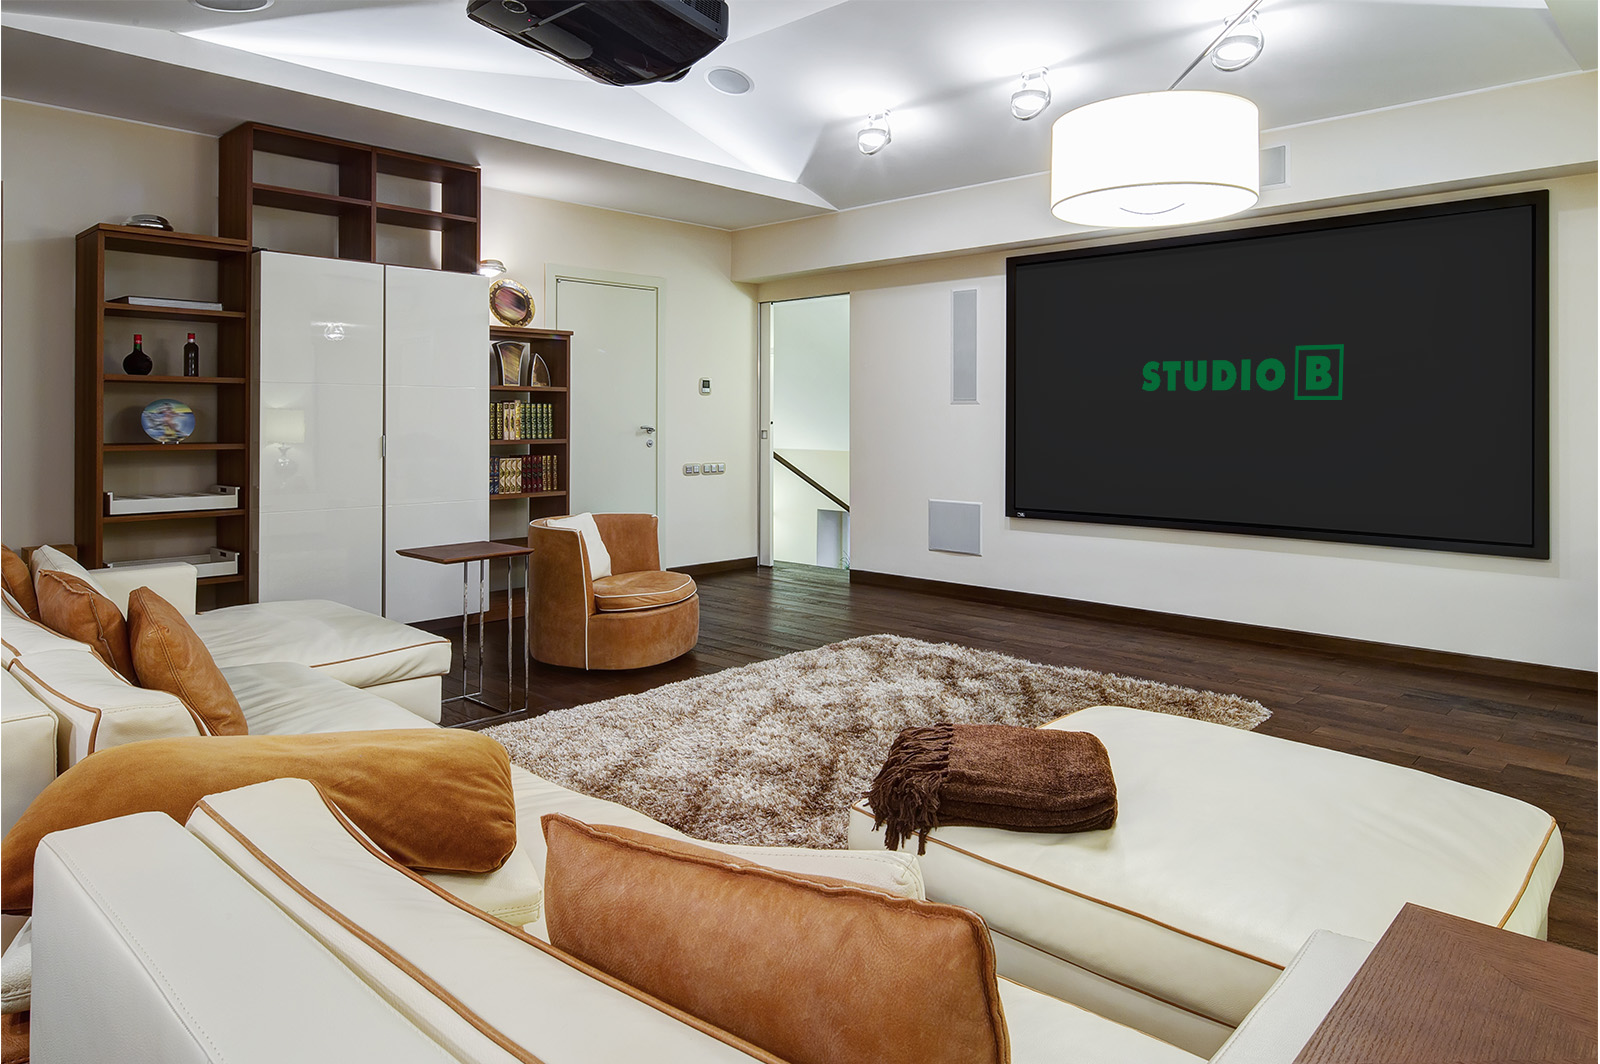 Show-Stopping Painting Ideas for Your Home Theater | MyBoysen